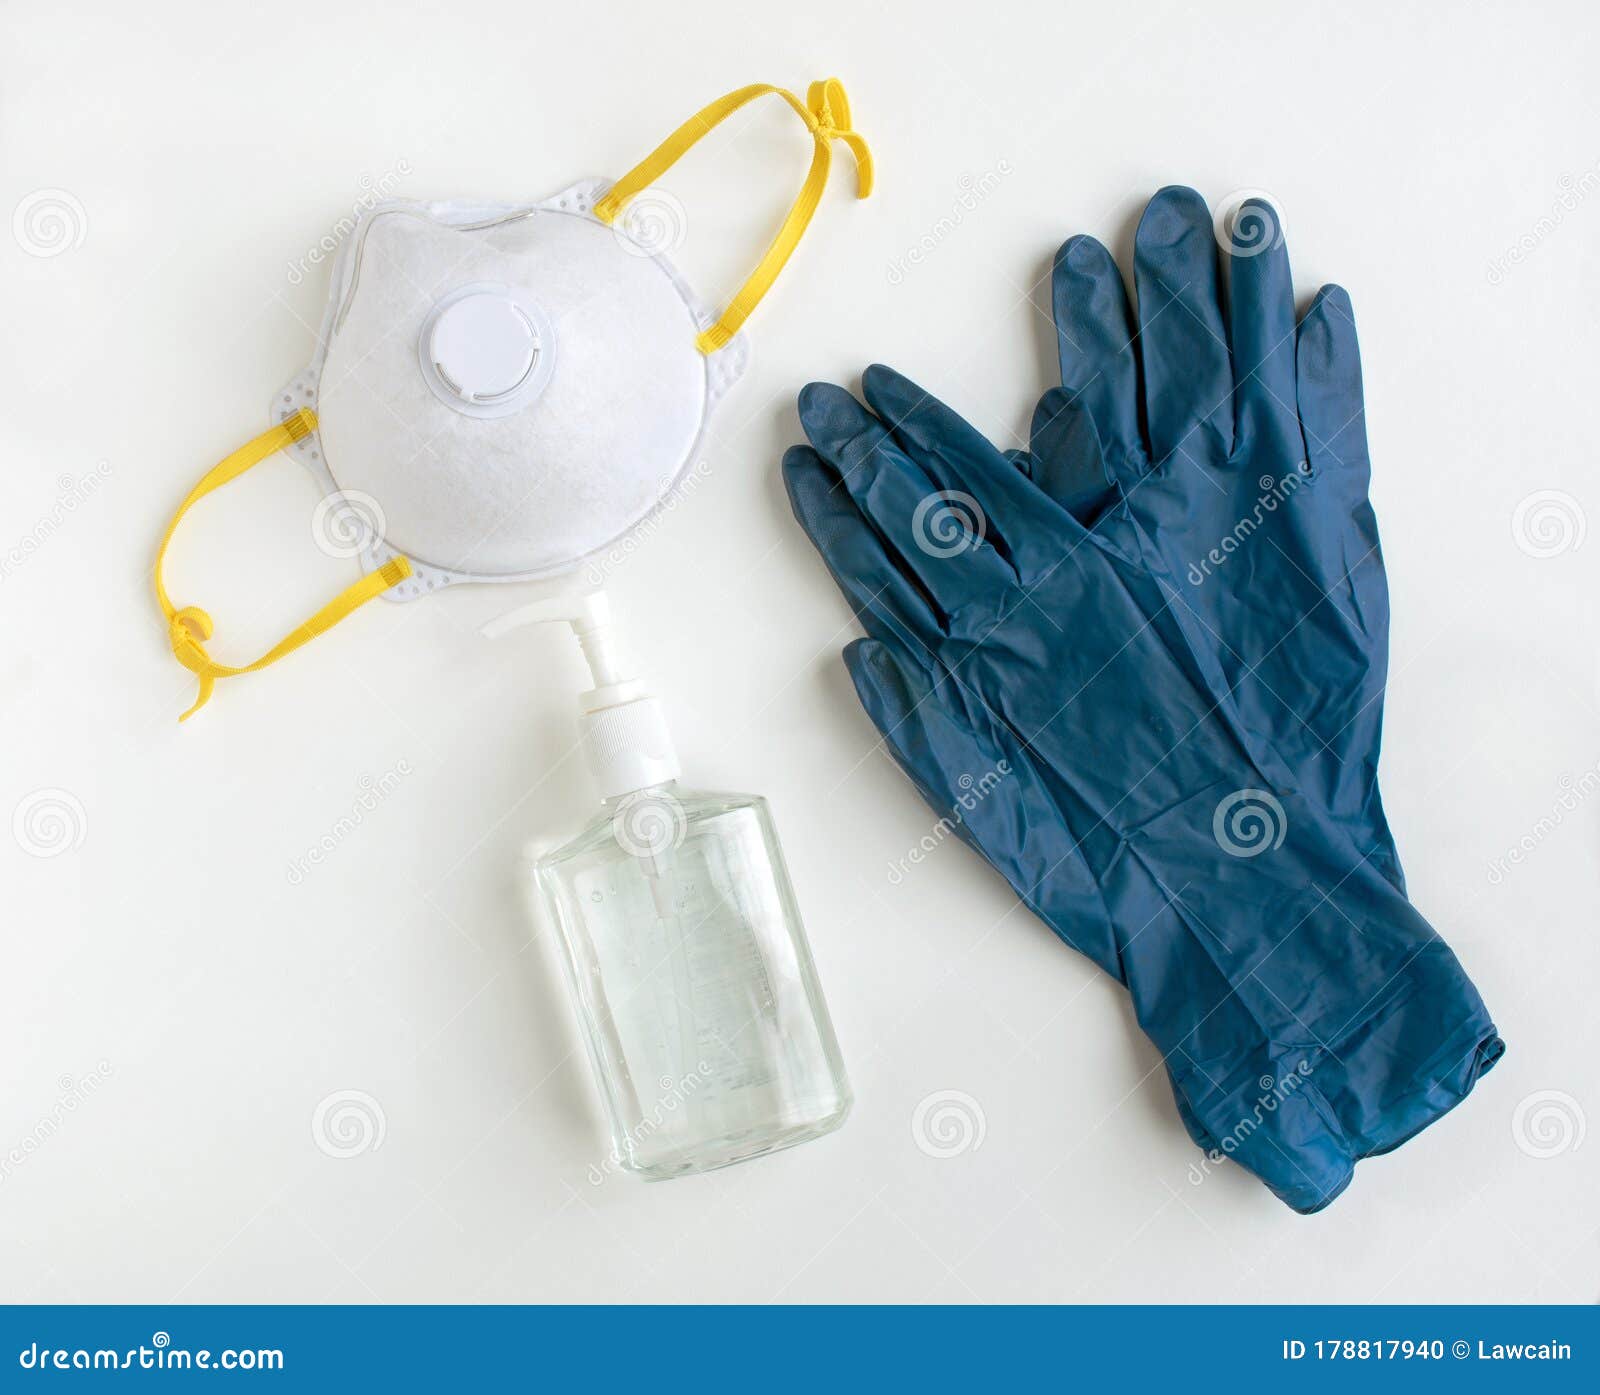 personal protective equipment with niosh 95 mask